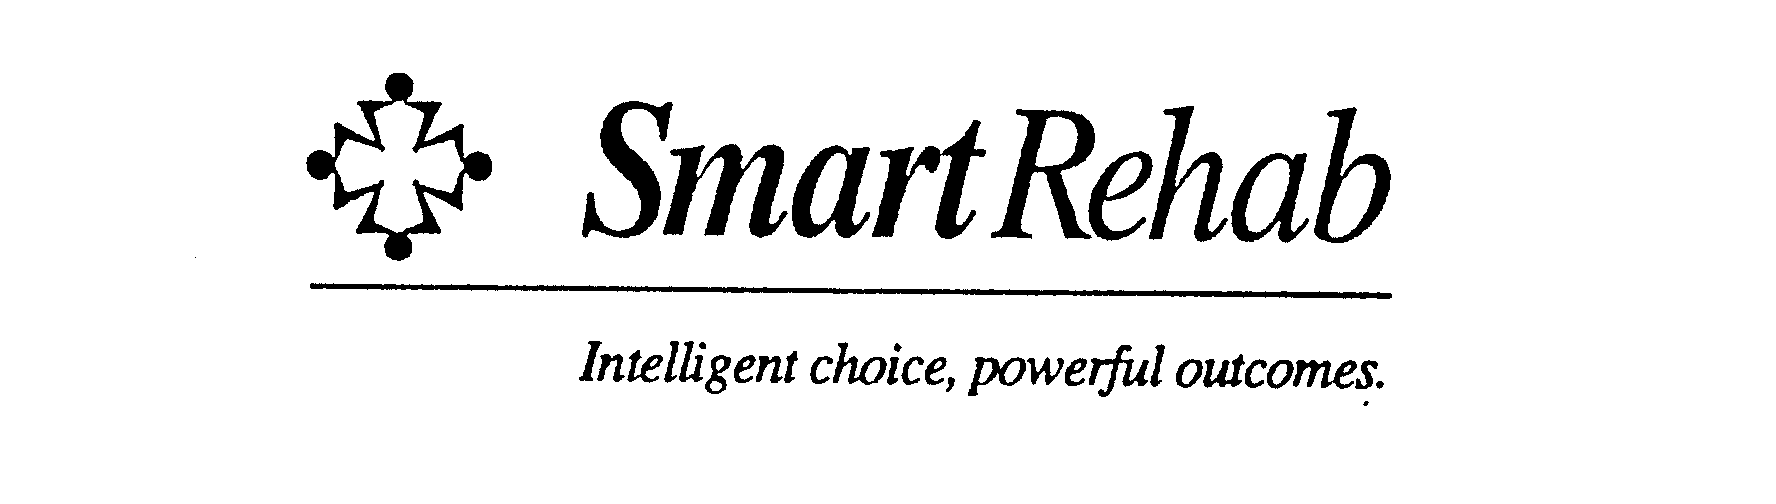  SMART REHAB INTELLIGENT CHOICE, POWERFUL OUTCOMES.